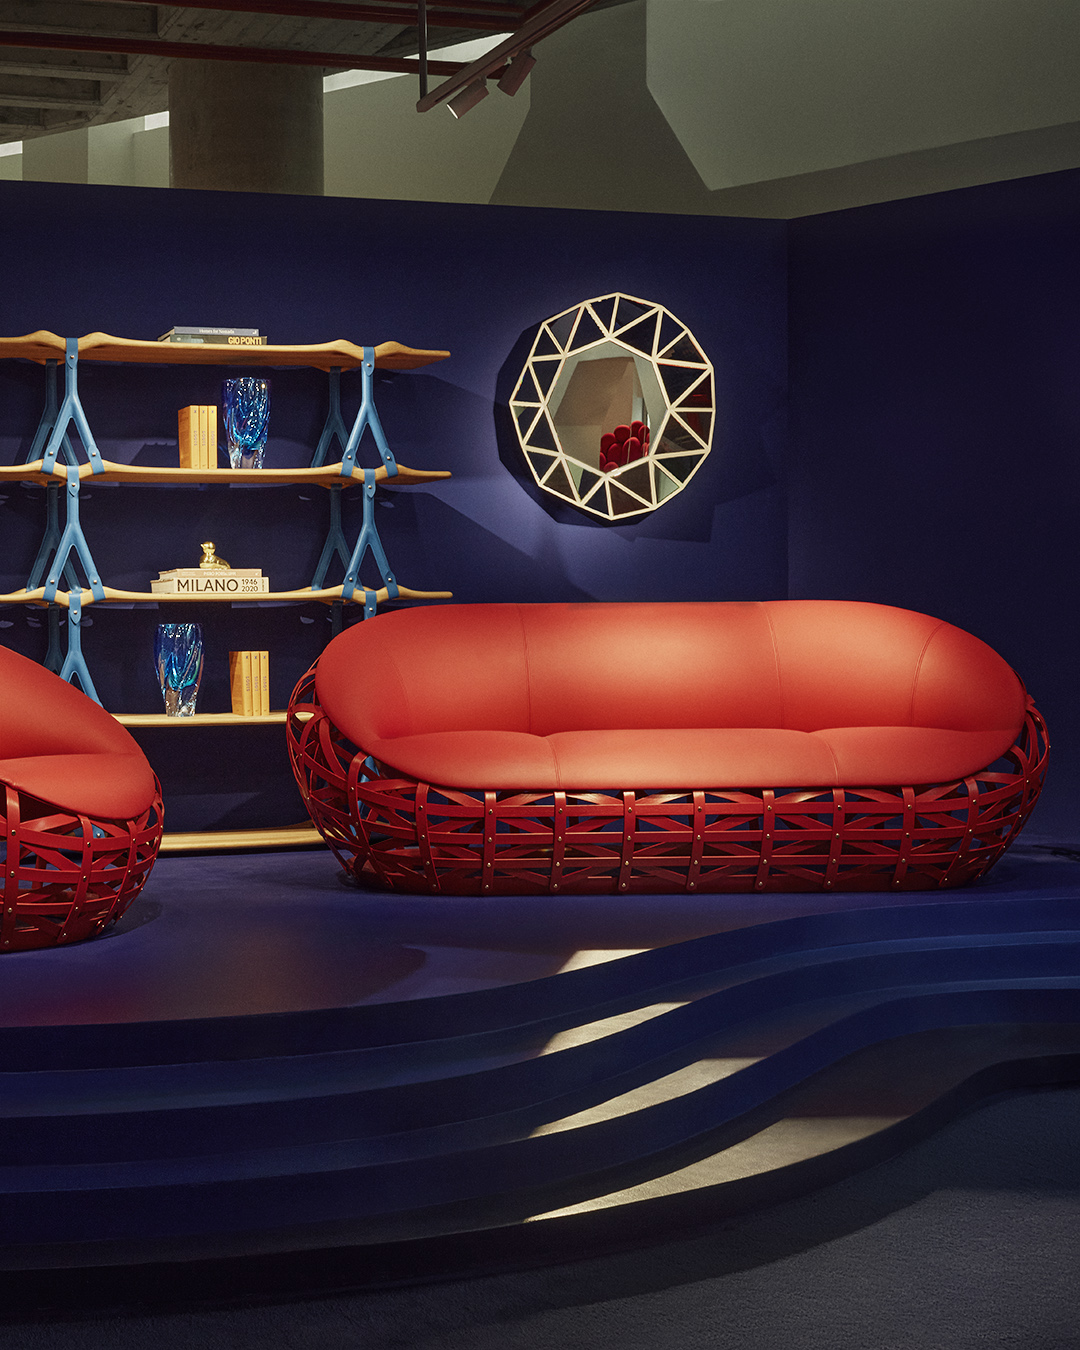 Louis Vuitton on X: Now at Milano Design Week: Objets Nomades. # LouisVuitton's collection inventive furniture created in collaboration with  renowned international designers are currently showcased in a specially  designed space at the